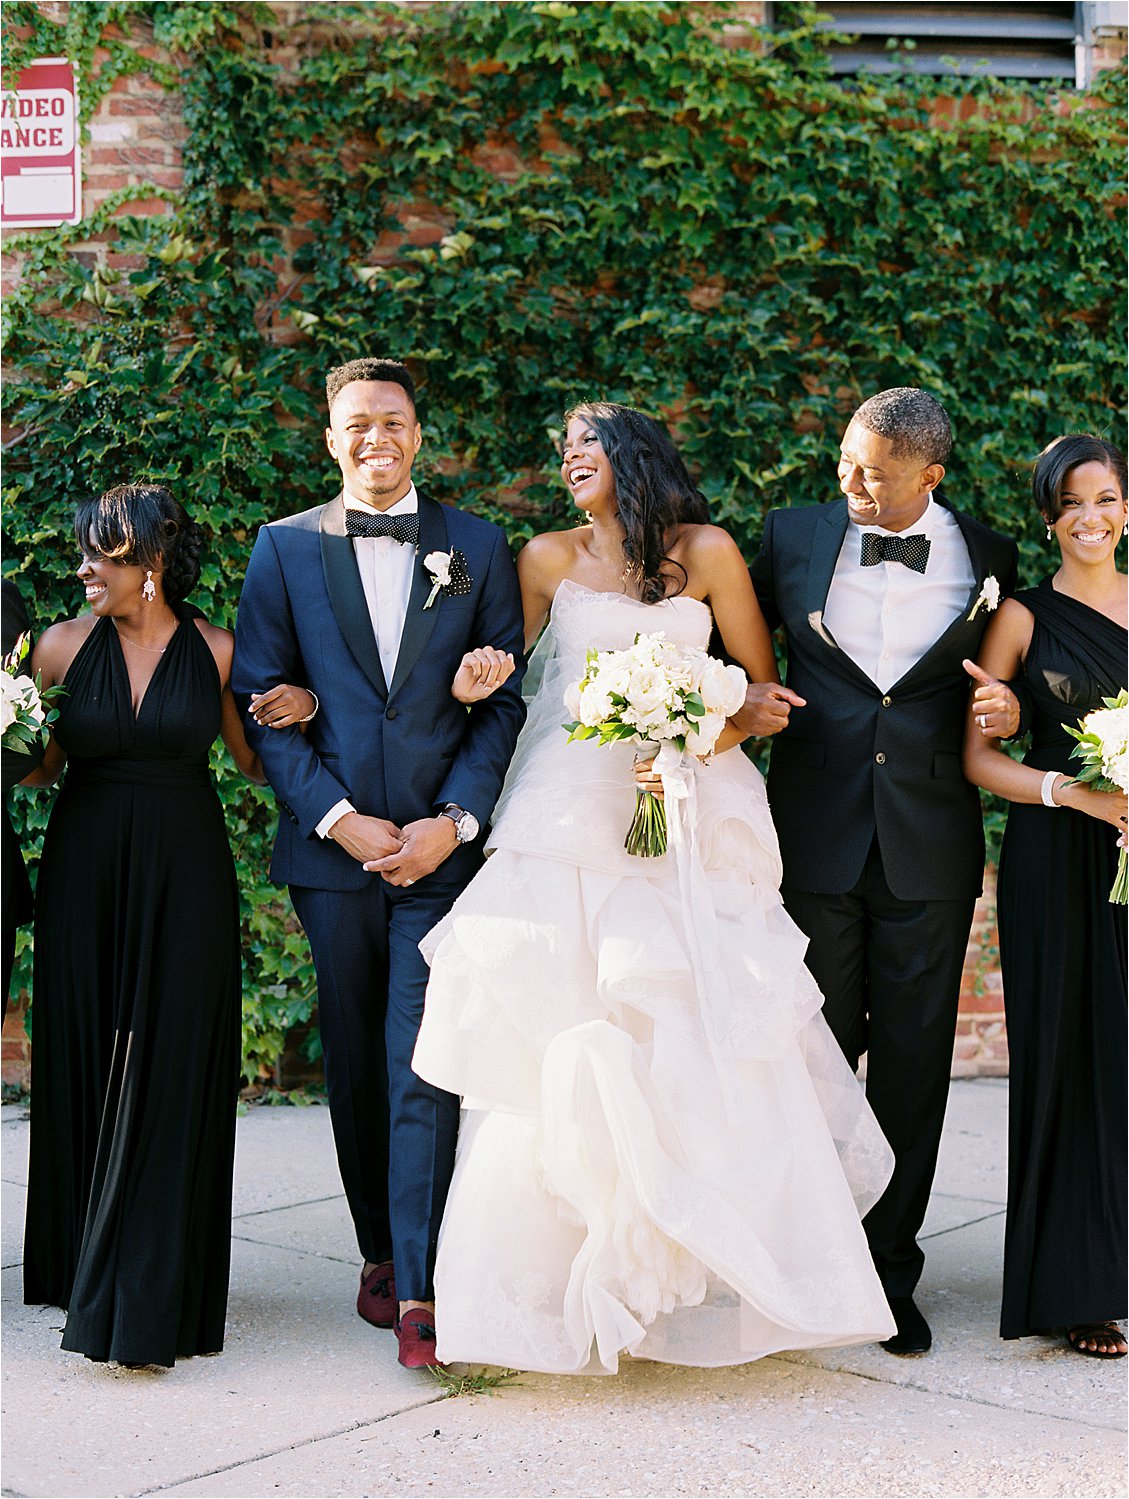 Black Bridal Party at Romantic Baltimore Museum Wedding at the American Visionary Arts Museum with Baltimore Film Wedding Photographer, Renee Hollingshead. As seen in Baltimore Weddings with Elle Ellinghaus Designs, My Flowerbox Events, White Glove Rentals, Just Write Studios and more.